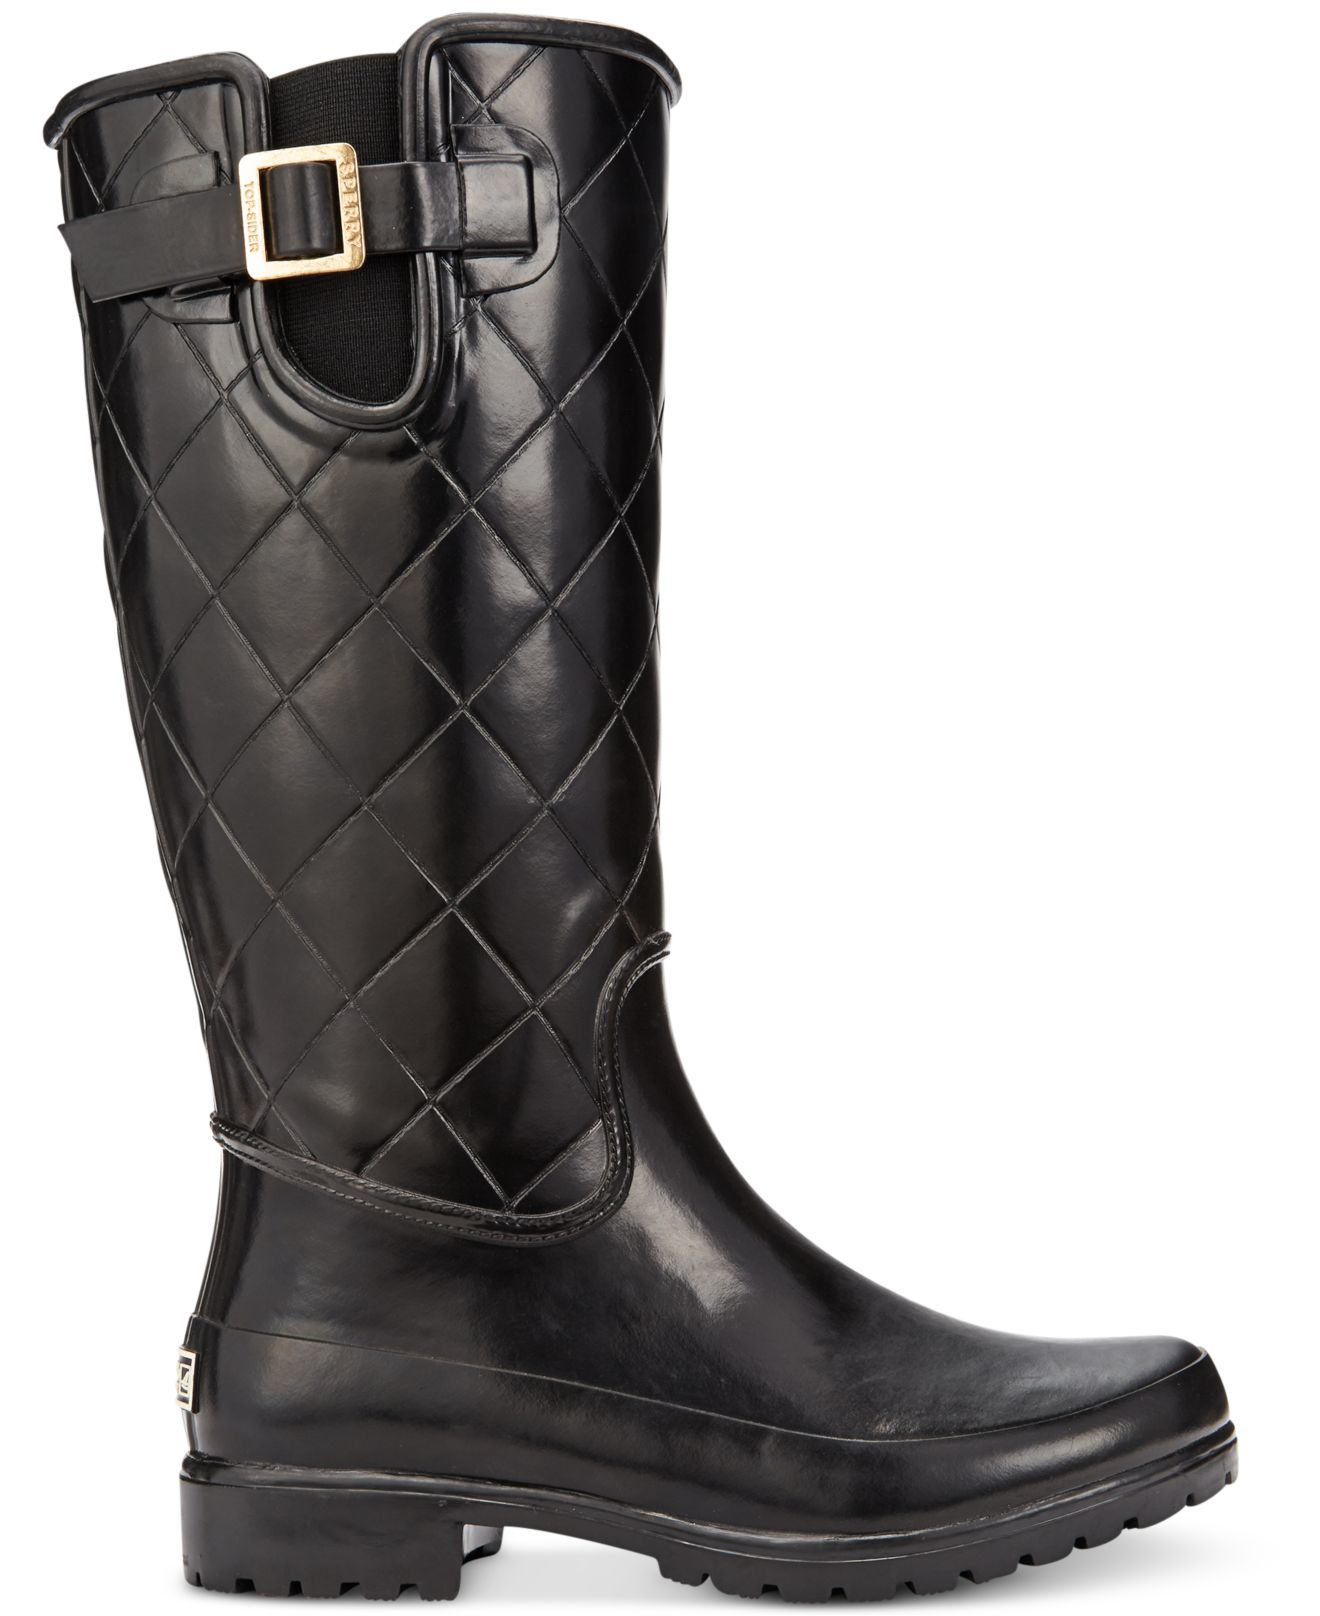 Lyst - Sperry Top-Sider Pelican Tall Rain Boots in Black